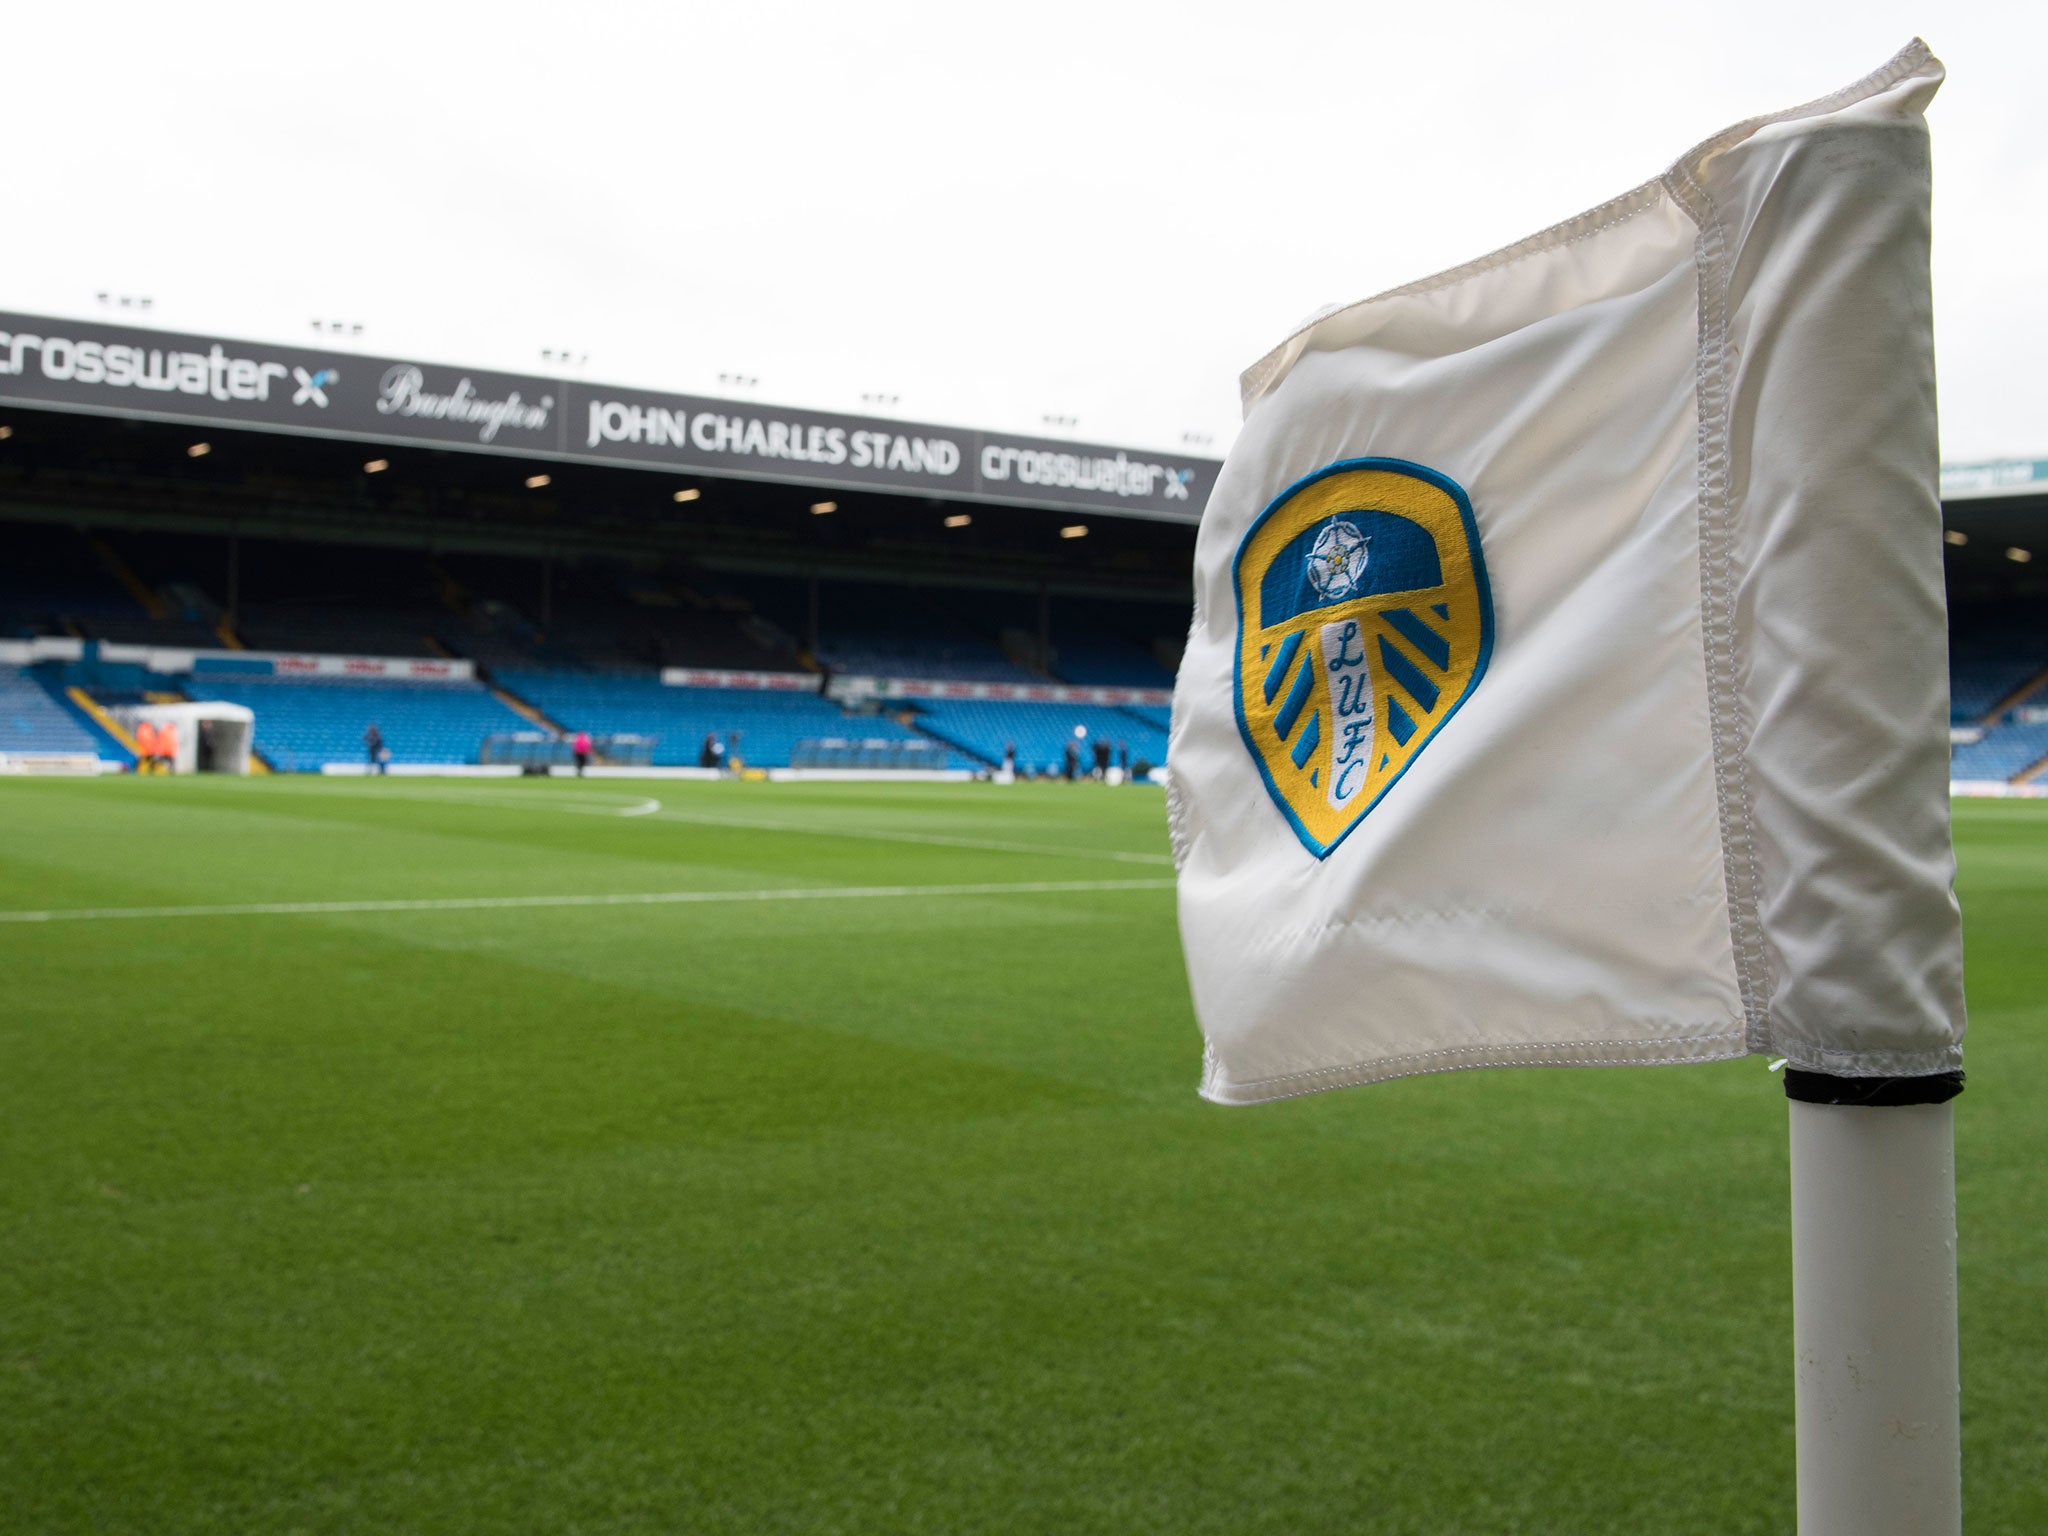 Leeds promised to refund season ticket holders if the club failed to make the play-offs